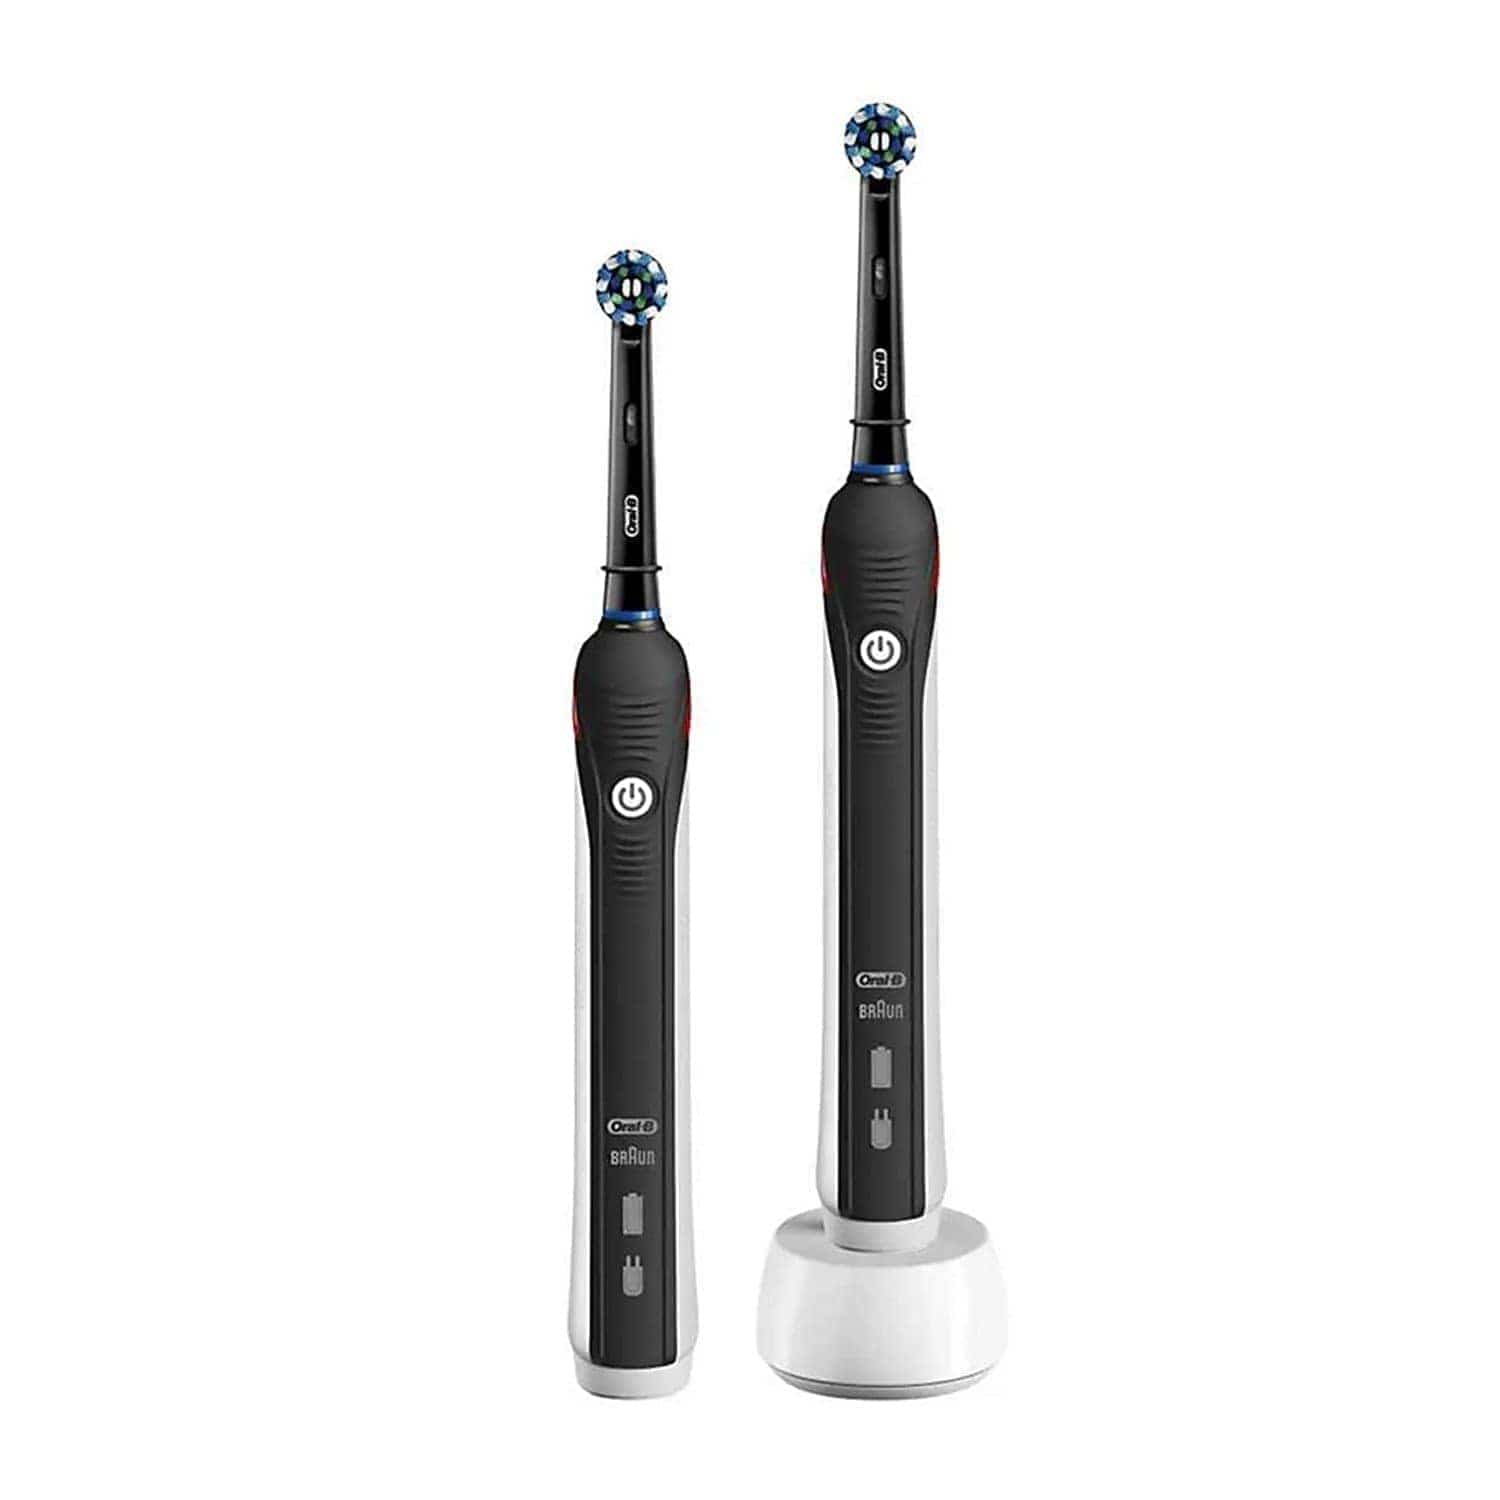 Braun Oral-B 2900 Rechargeable Dual Electric Toothbrush